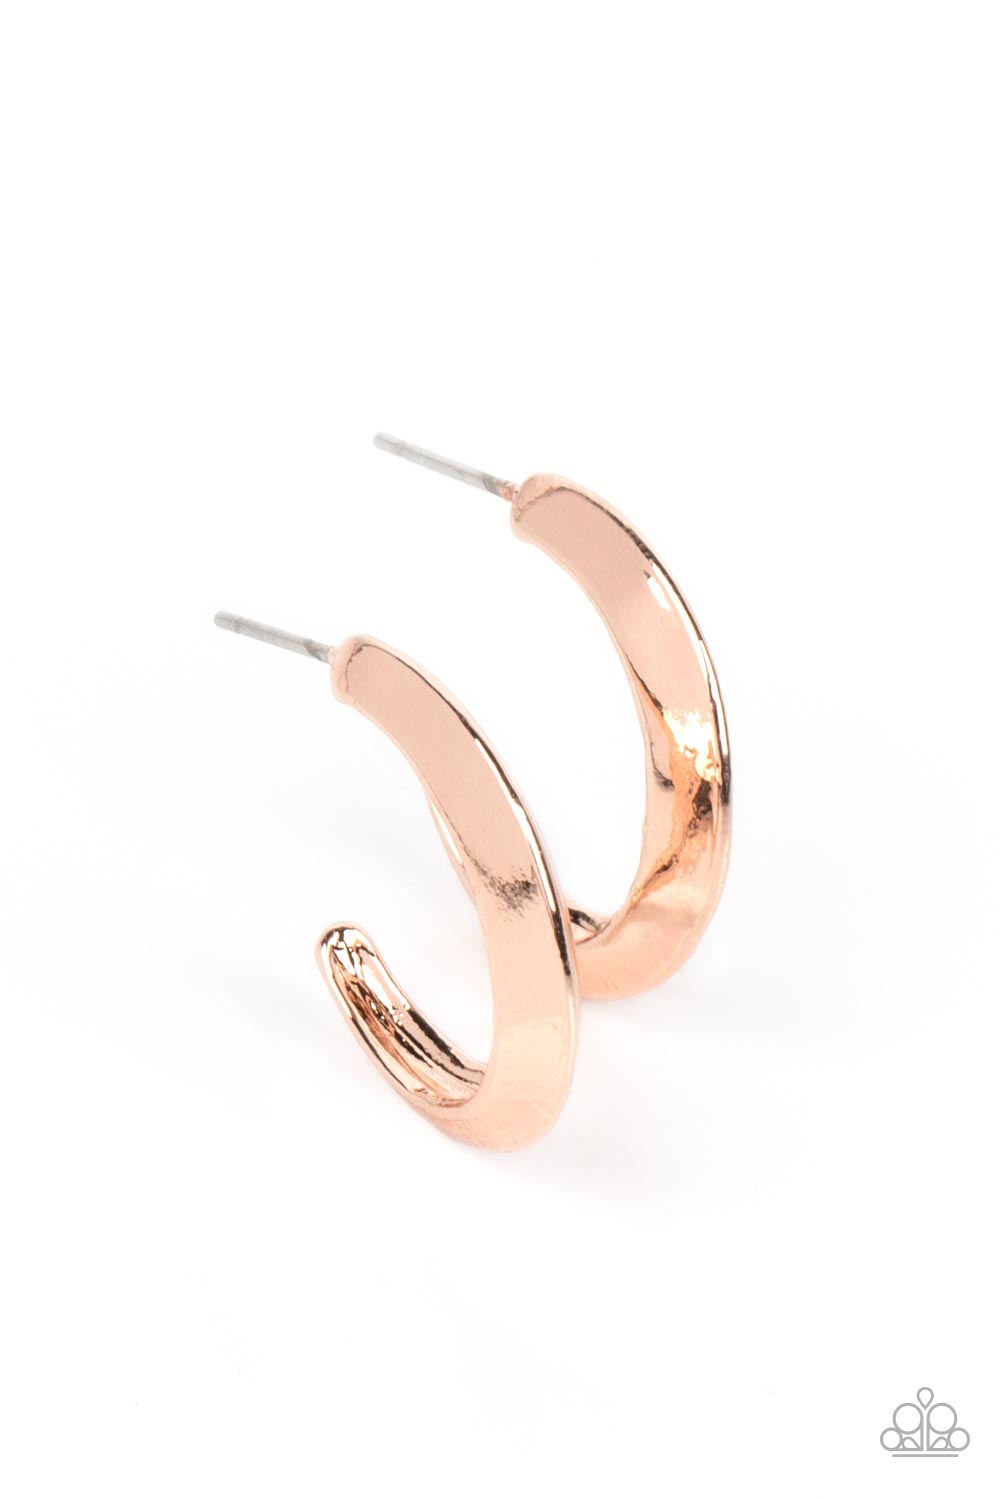 Paparazzi ♥ BEVEL Up - Rose Gold ♥ Earrings